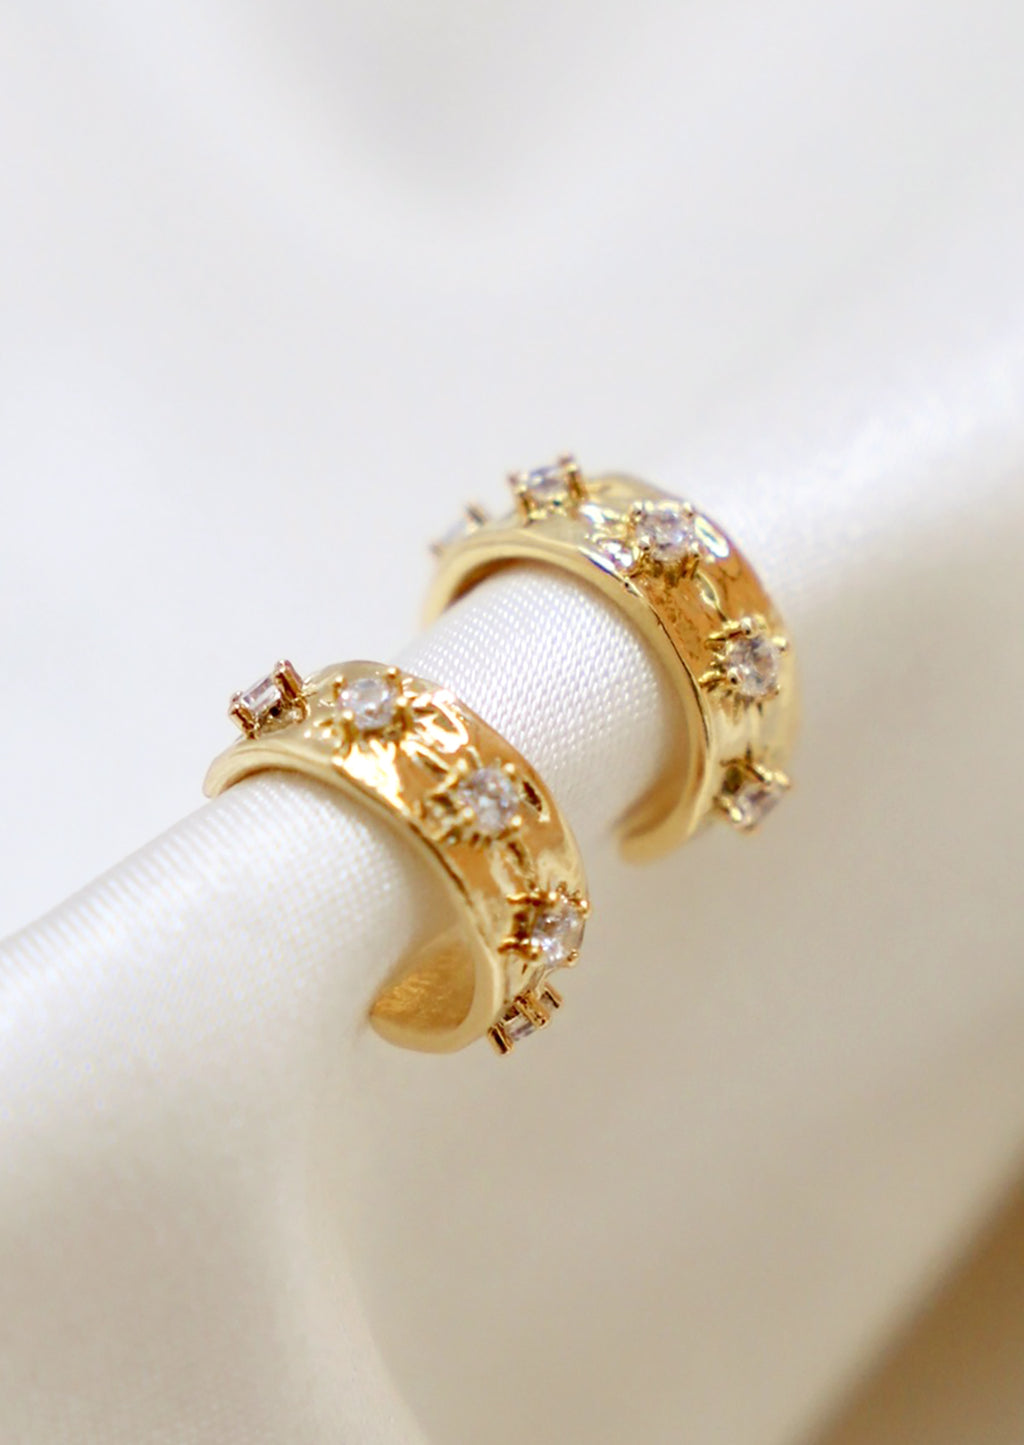 2: A pair of small gold hoop earrings with raised crystal starbust pattern.